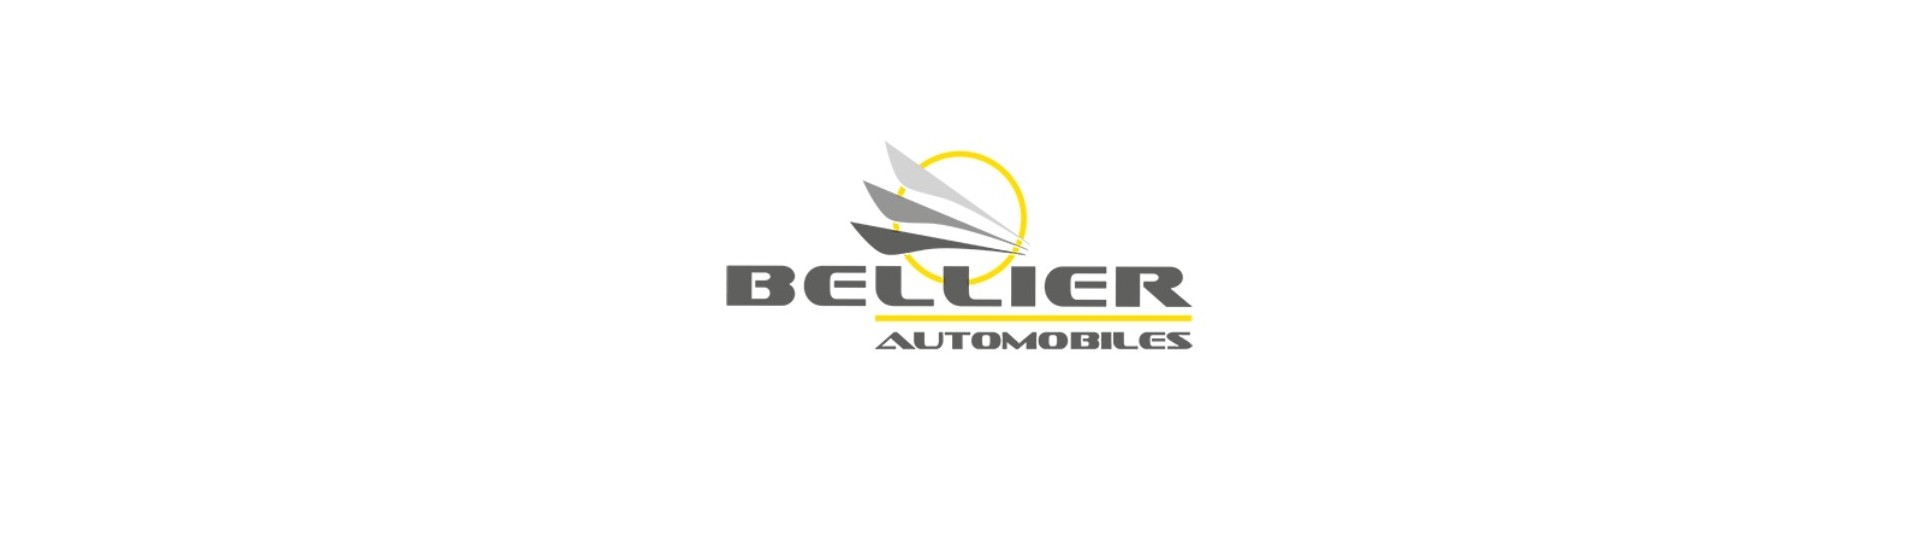 Wheel pack at the best price for cars without a license Bellier